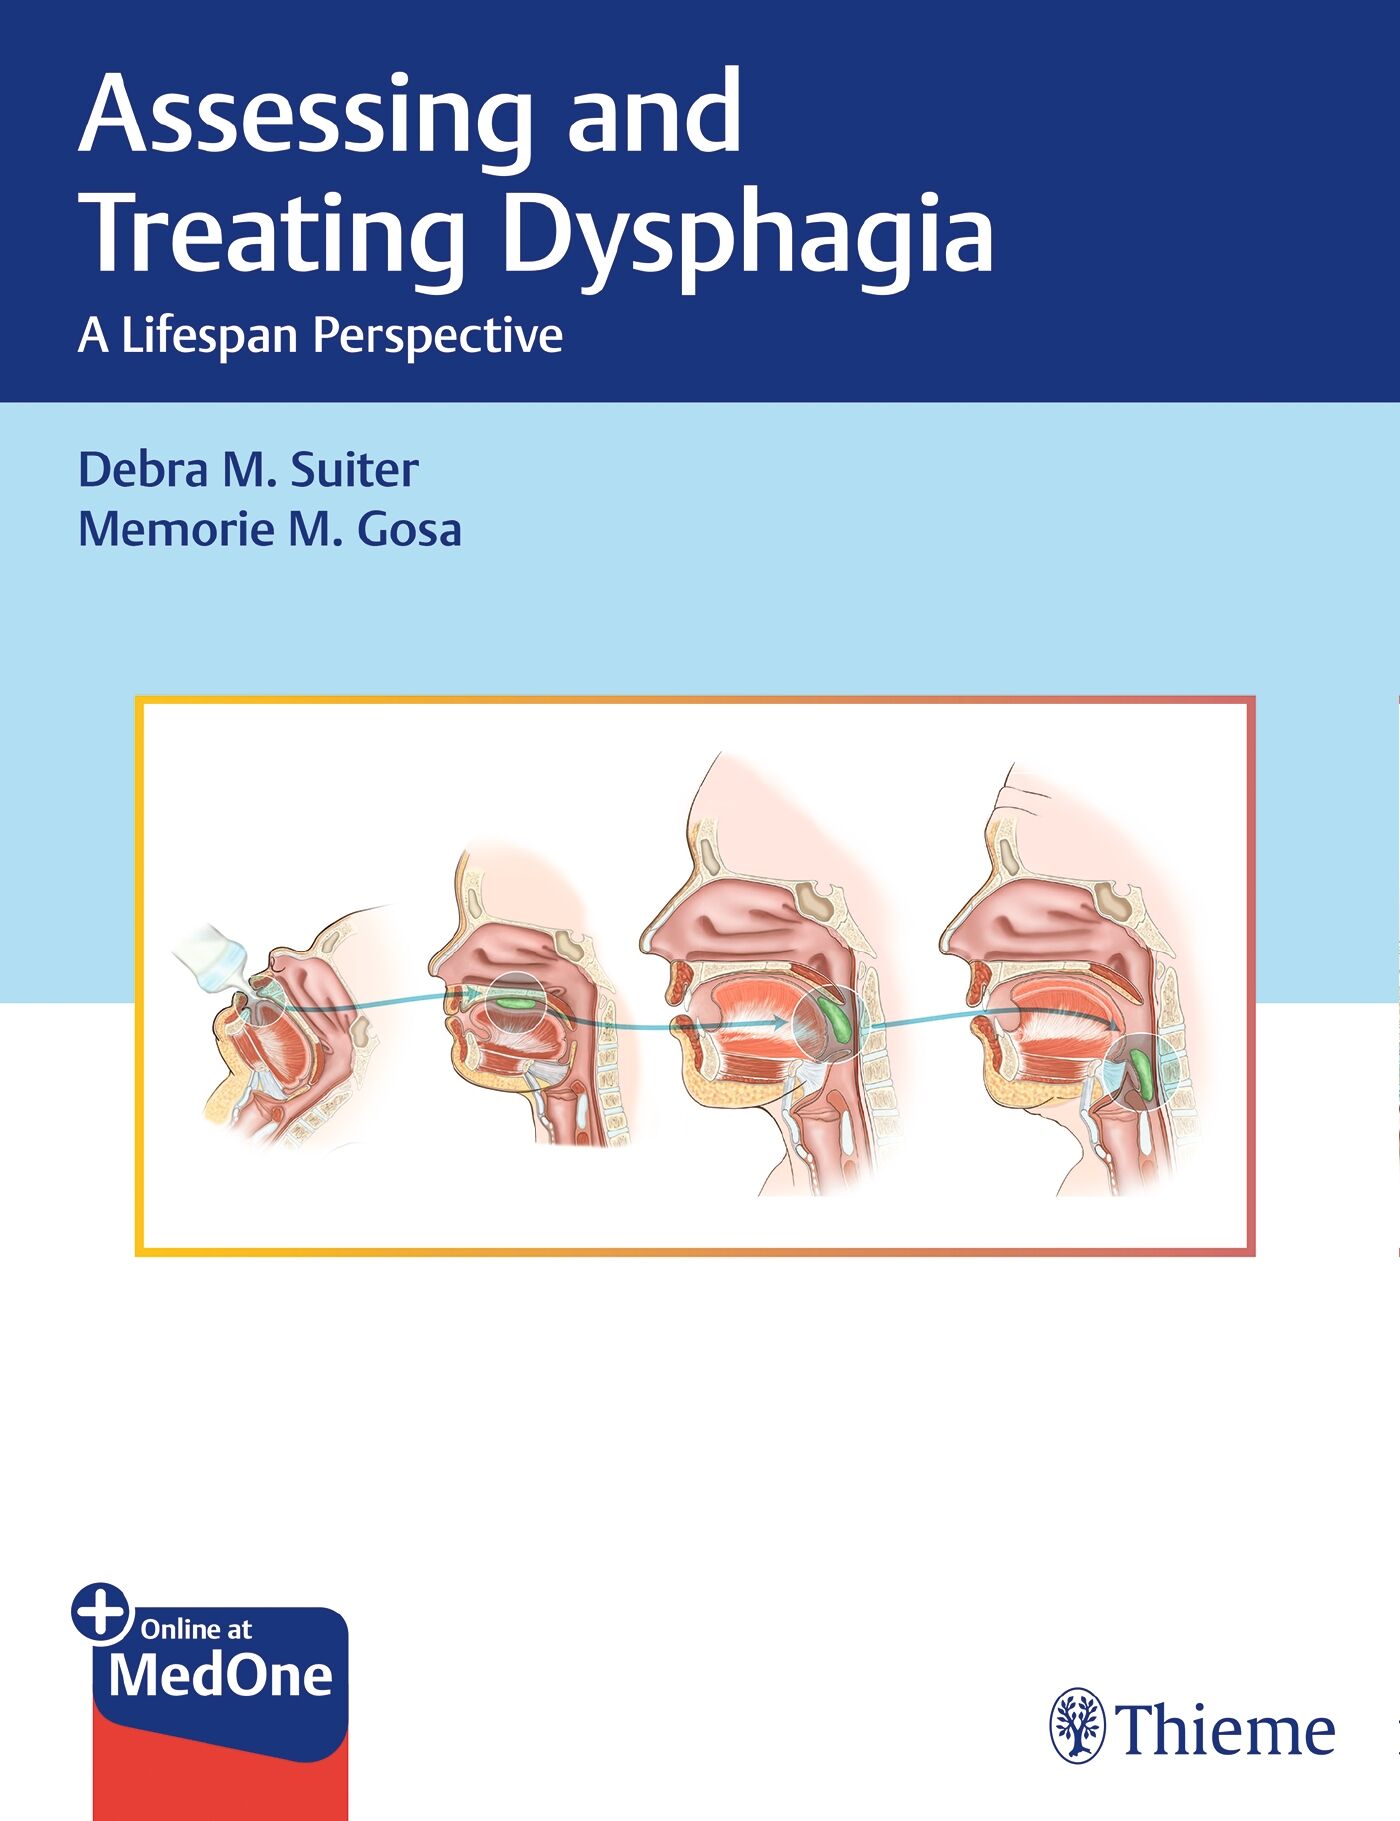 Assessing and Treating Dysphagia, 9781626232150